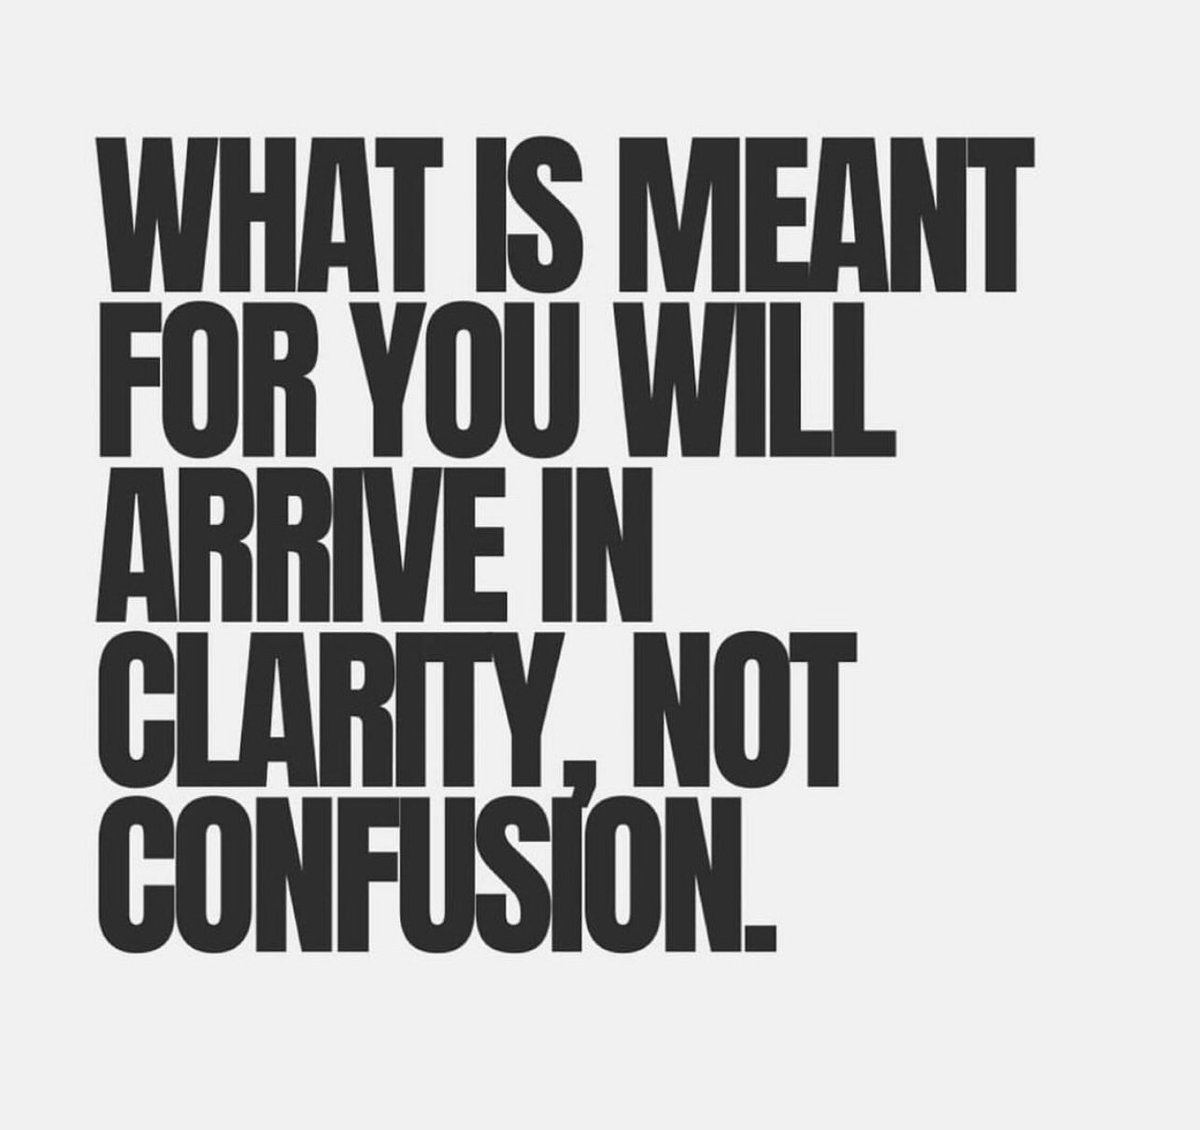 God’s Peace always brings clarity, not confusion… ☮️🕊️ 
🦋🔥💪🏾🌱 
#GodsPlan #GodsPeace #ClarityNotConfusion #EmbraceTheJourney #OwnYourLife